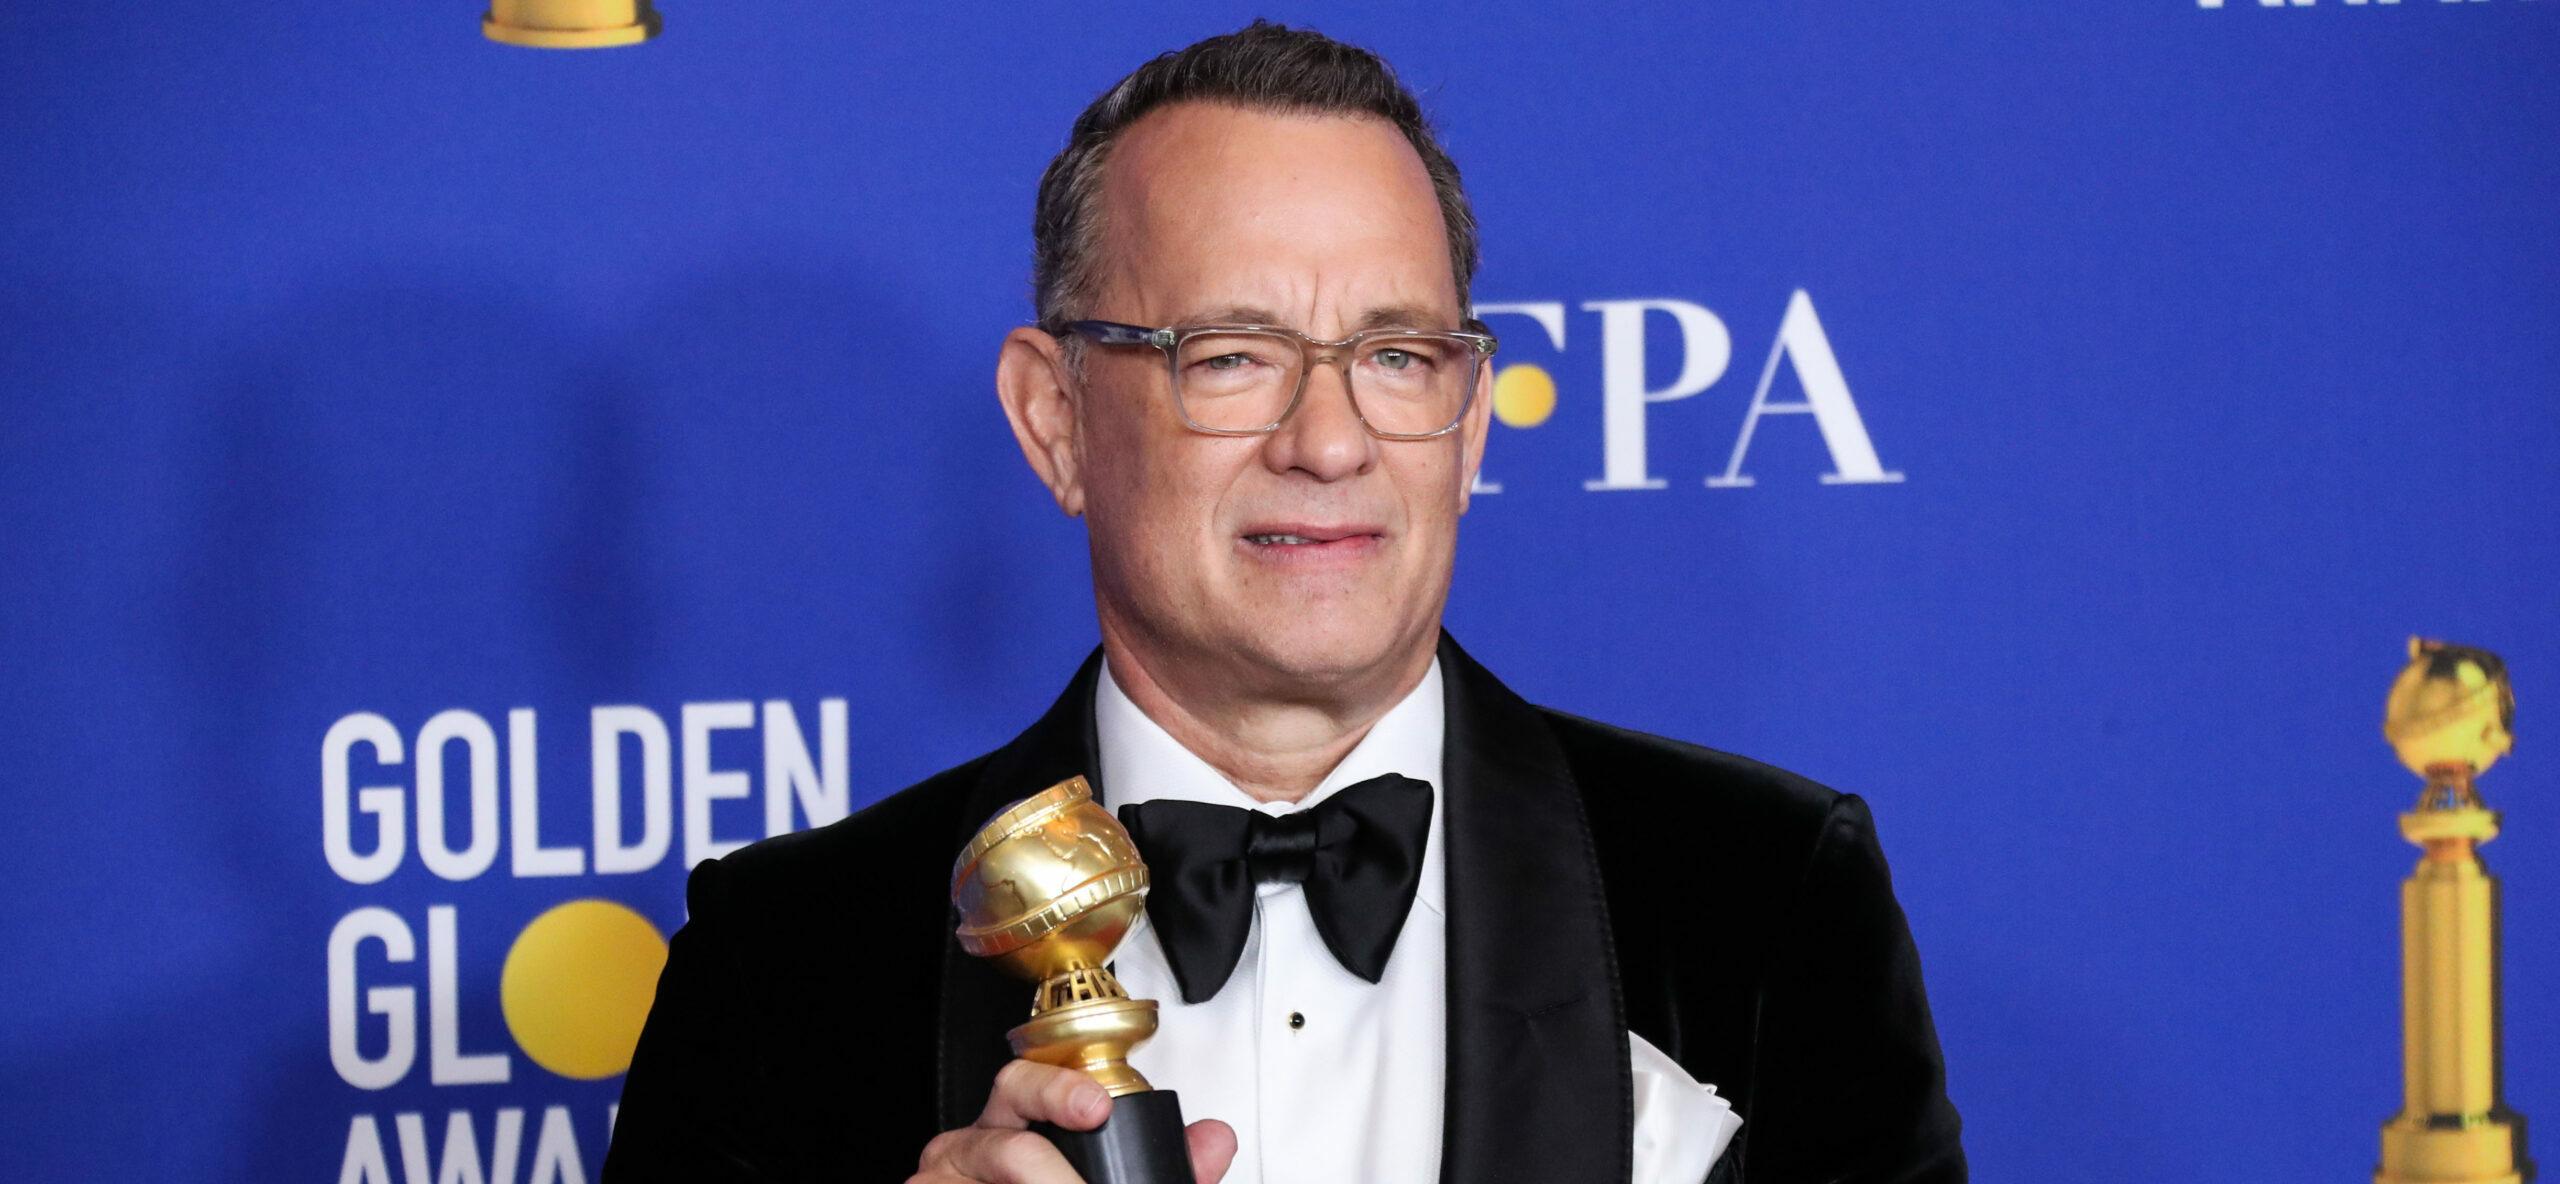 Tom Hanks holding a Golden Globes Award with a huge smile on his face.